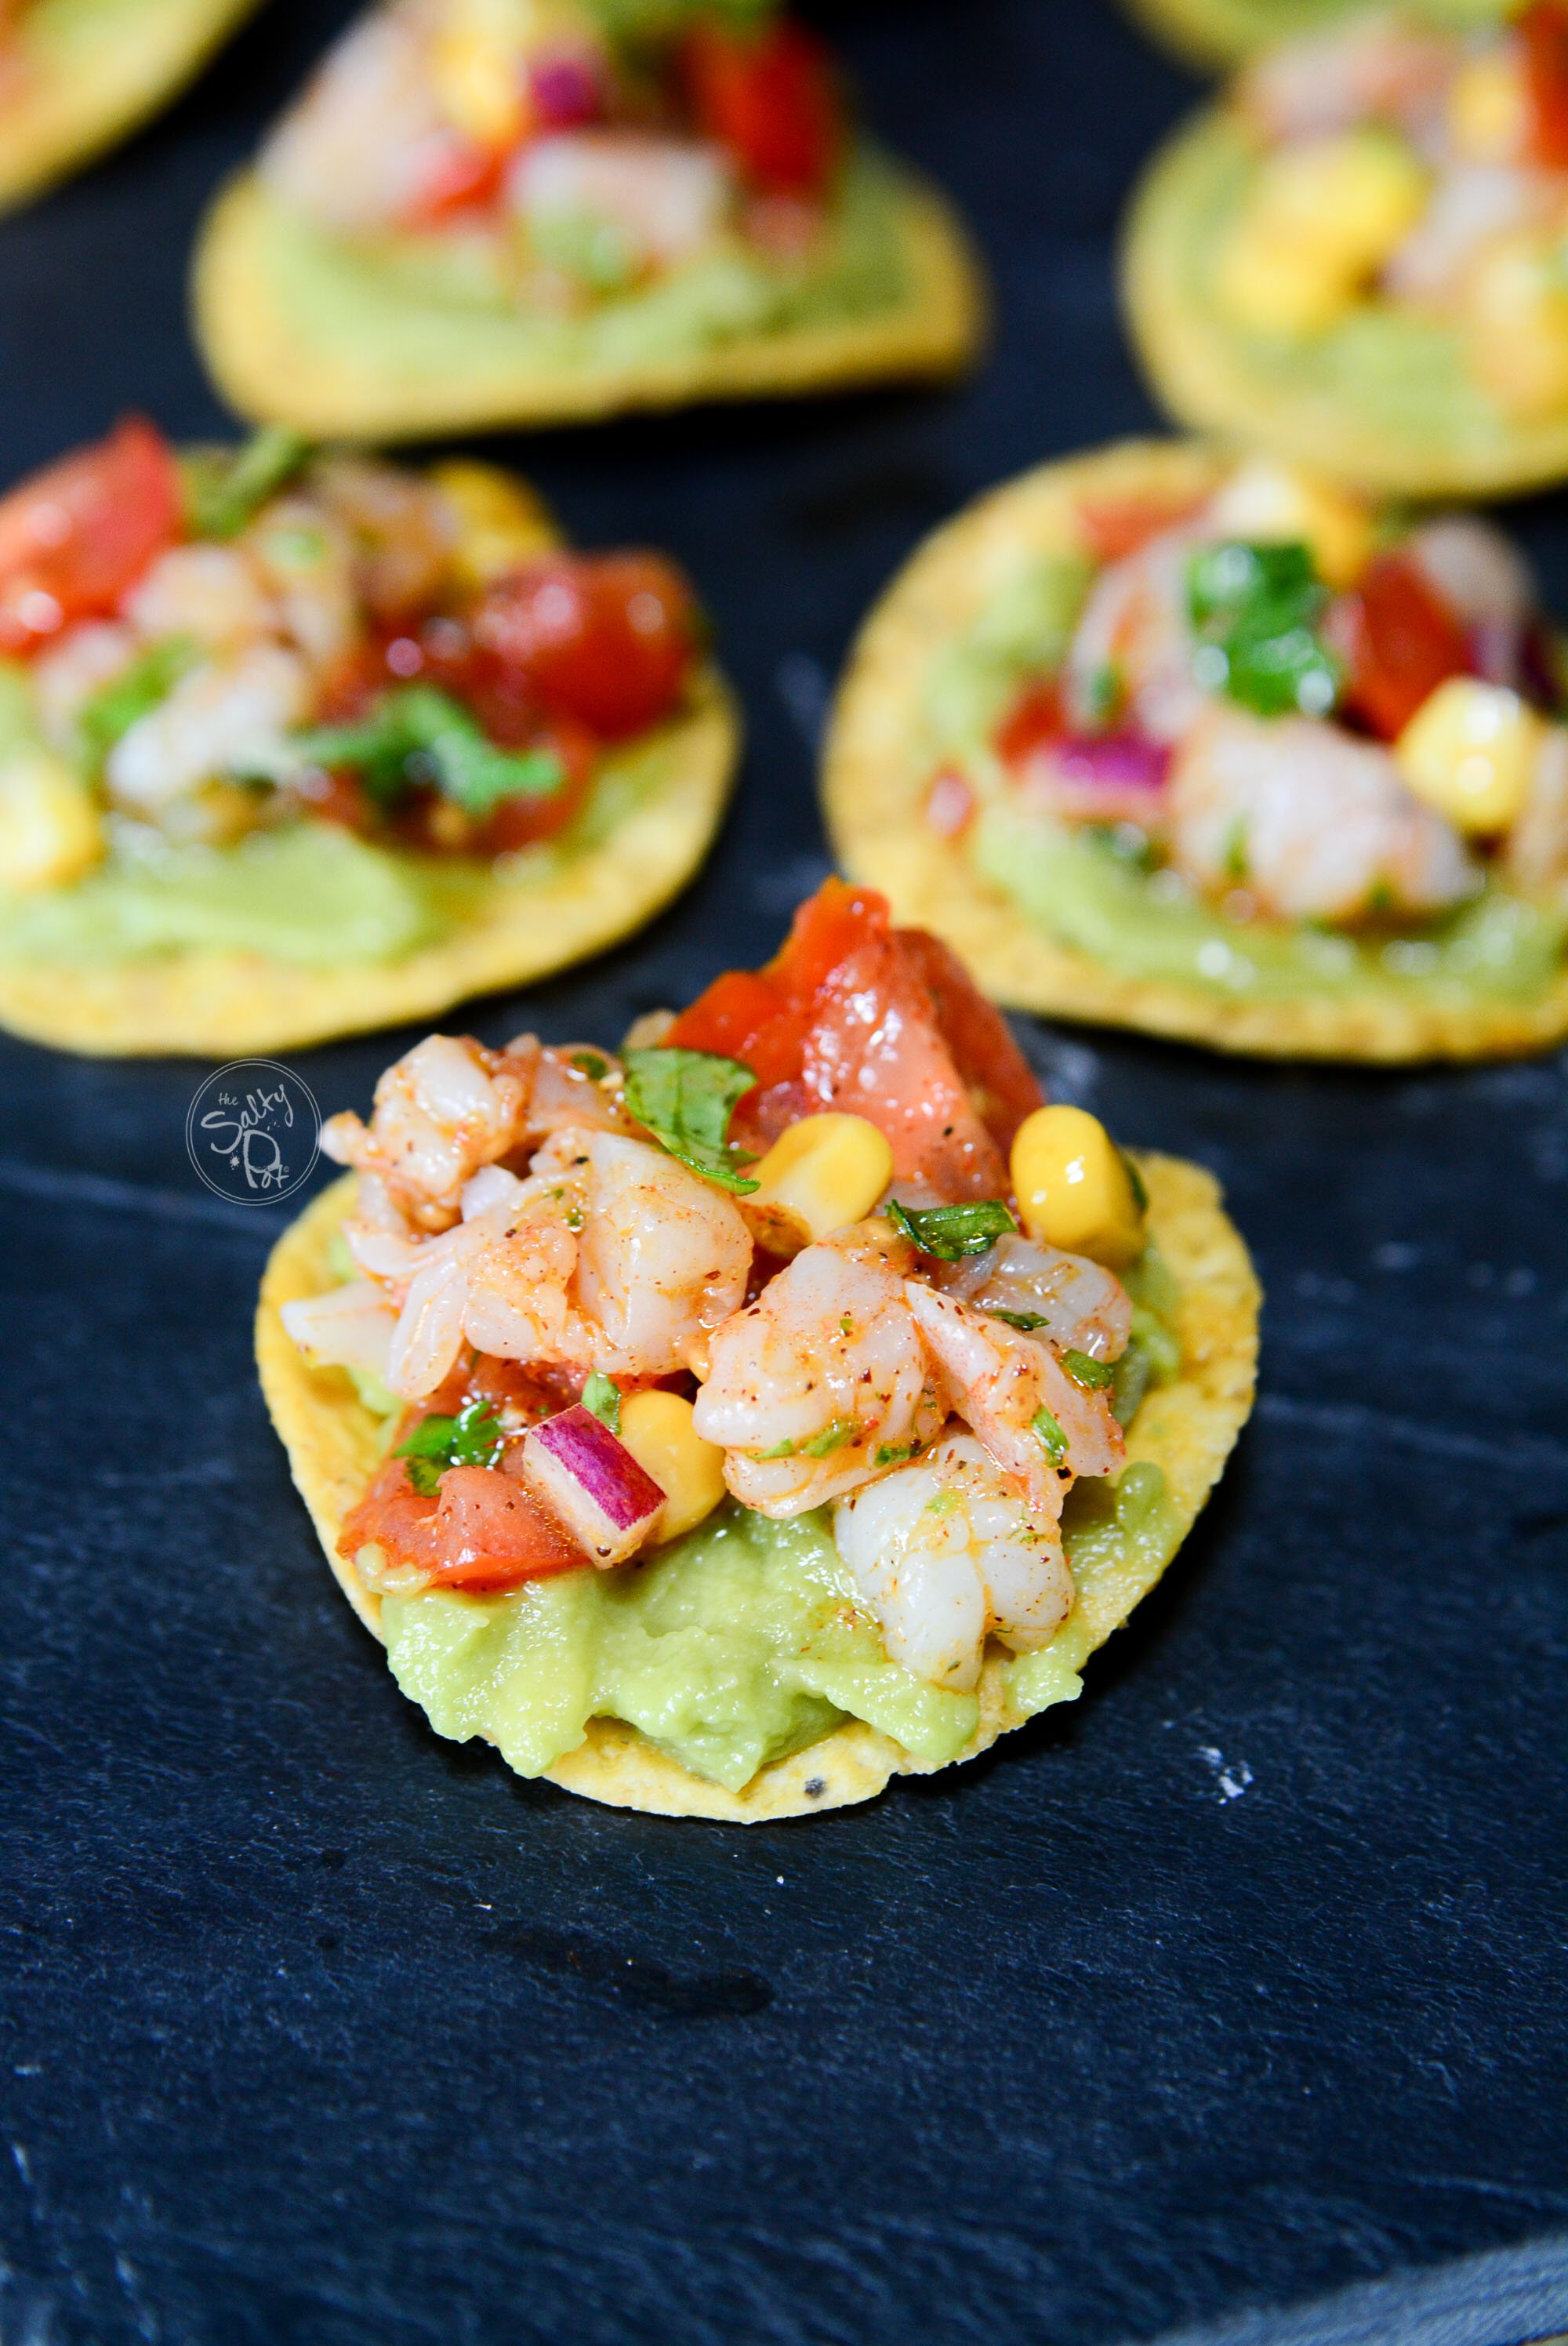 Chili Lime Shrimp on a tortilla round.